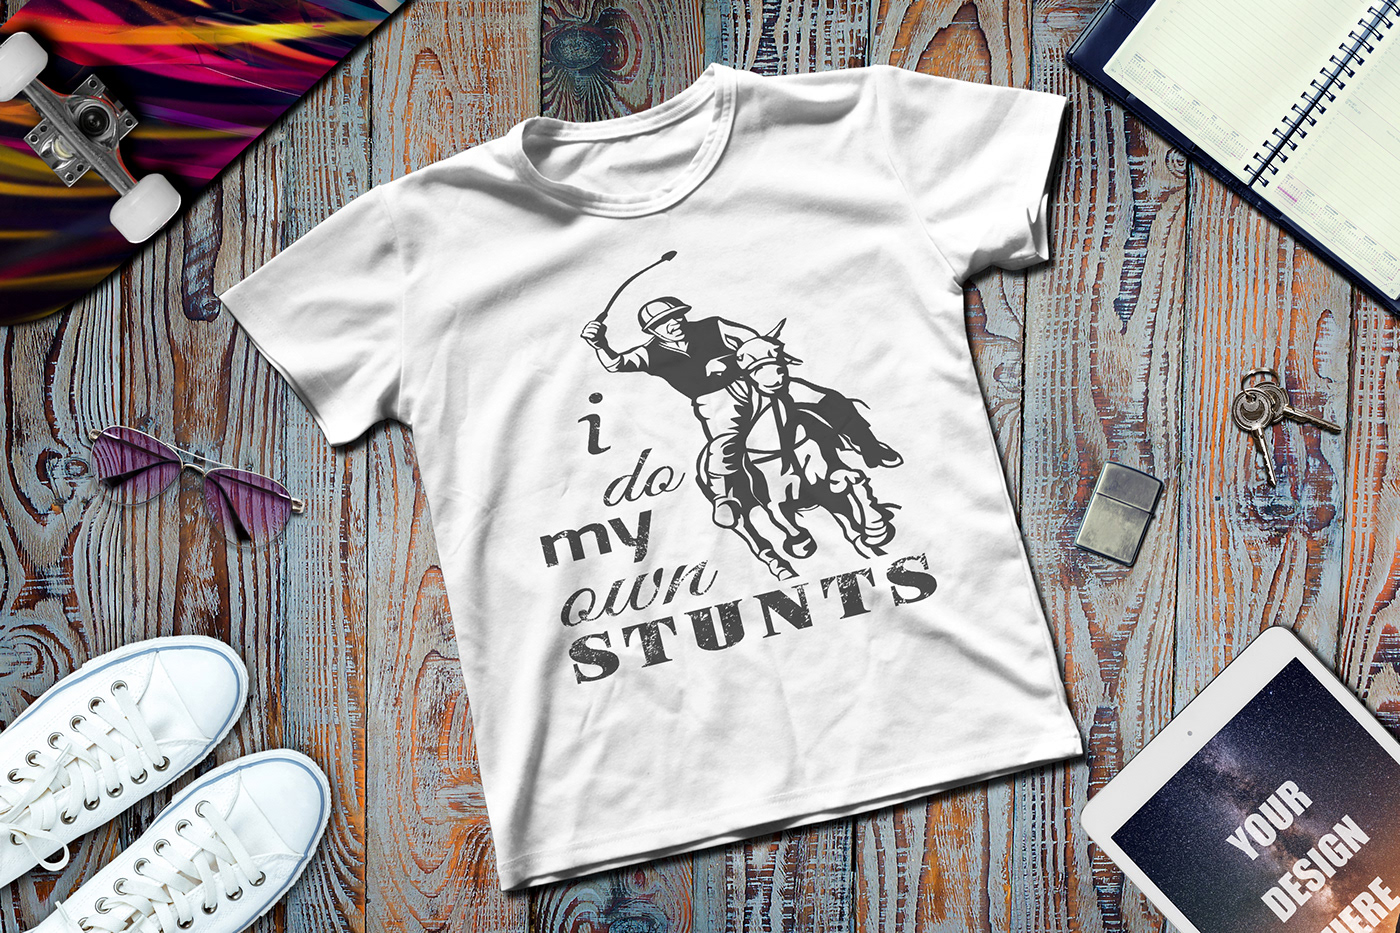 horse t-shirts horse t-shirts with funny sayings horse t shirt designs horse t shirts with shirt girl horse t shirts uk horse t shirts australia horse t shirt ideas horse